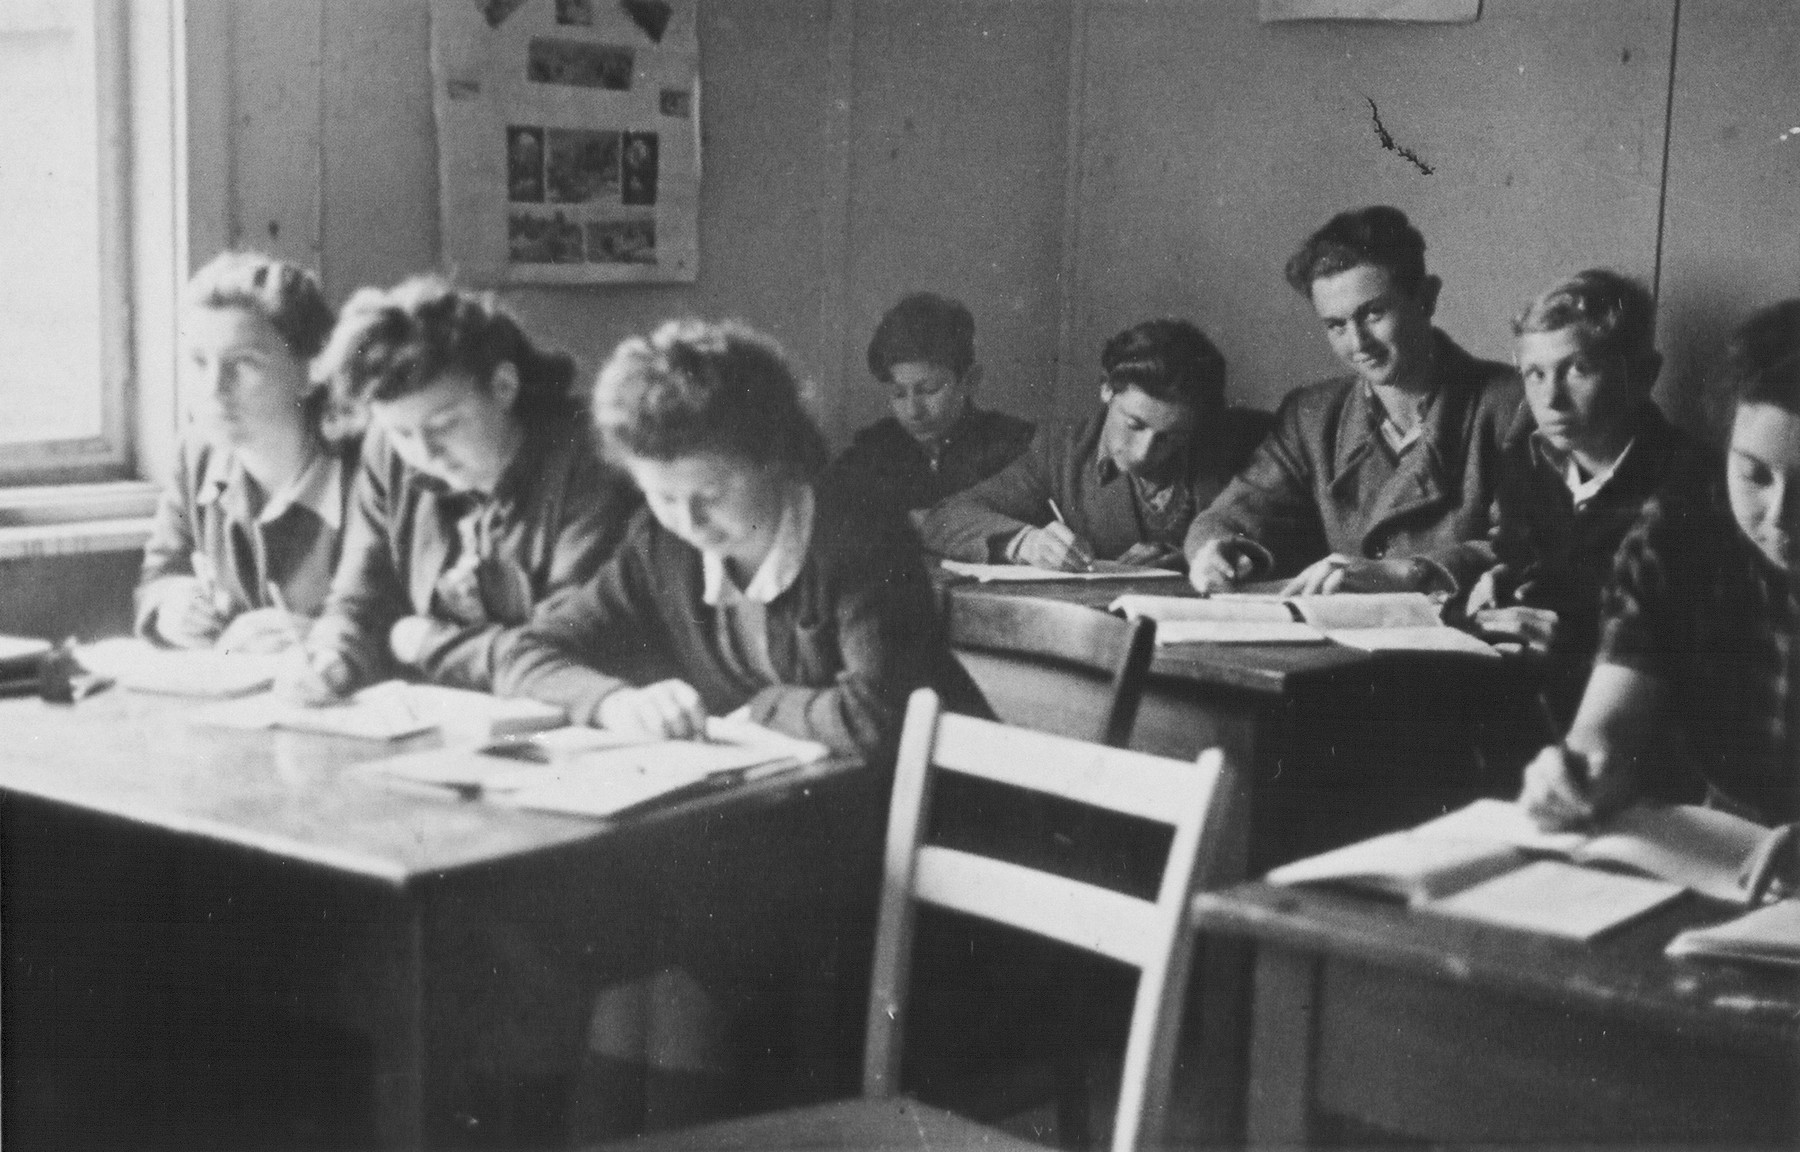 Jewish DP youth study in a high school classroom at the Schlachtensee displaced persons camp.  

Among those pictured is Regina Laks (front row, right).